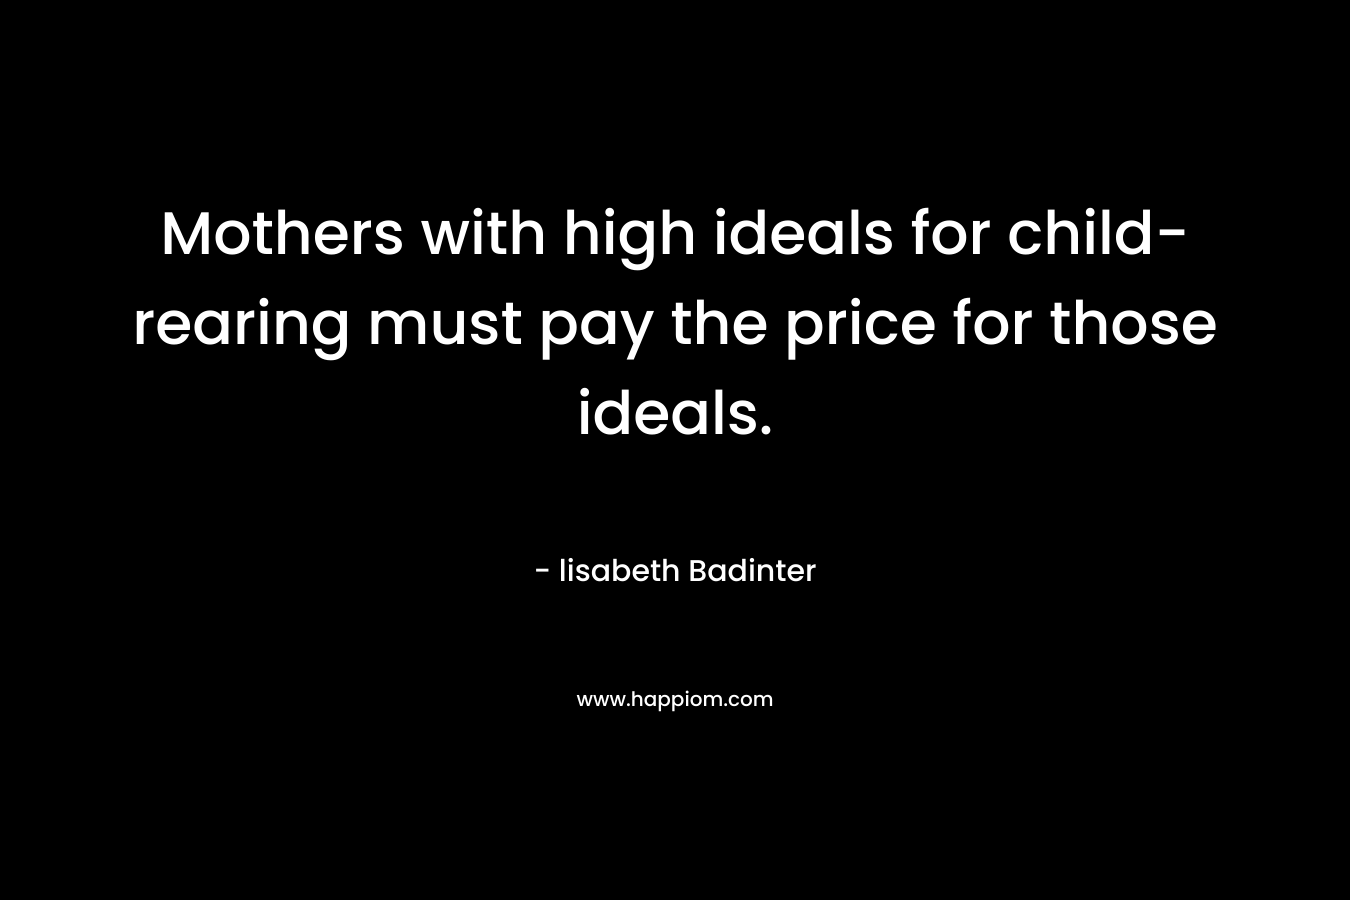 Mothers with high ideals for child-rearing must pay the price for those ideals.